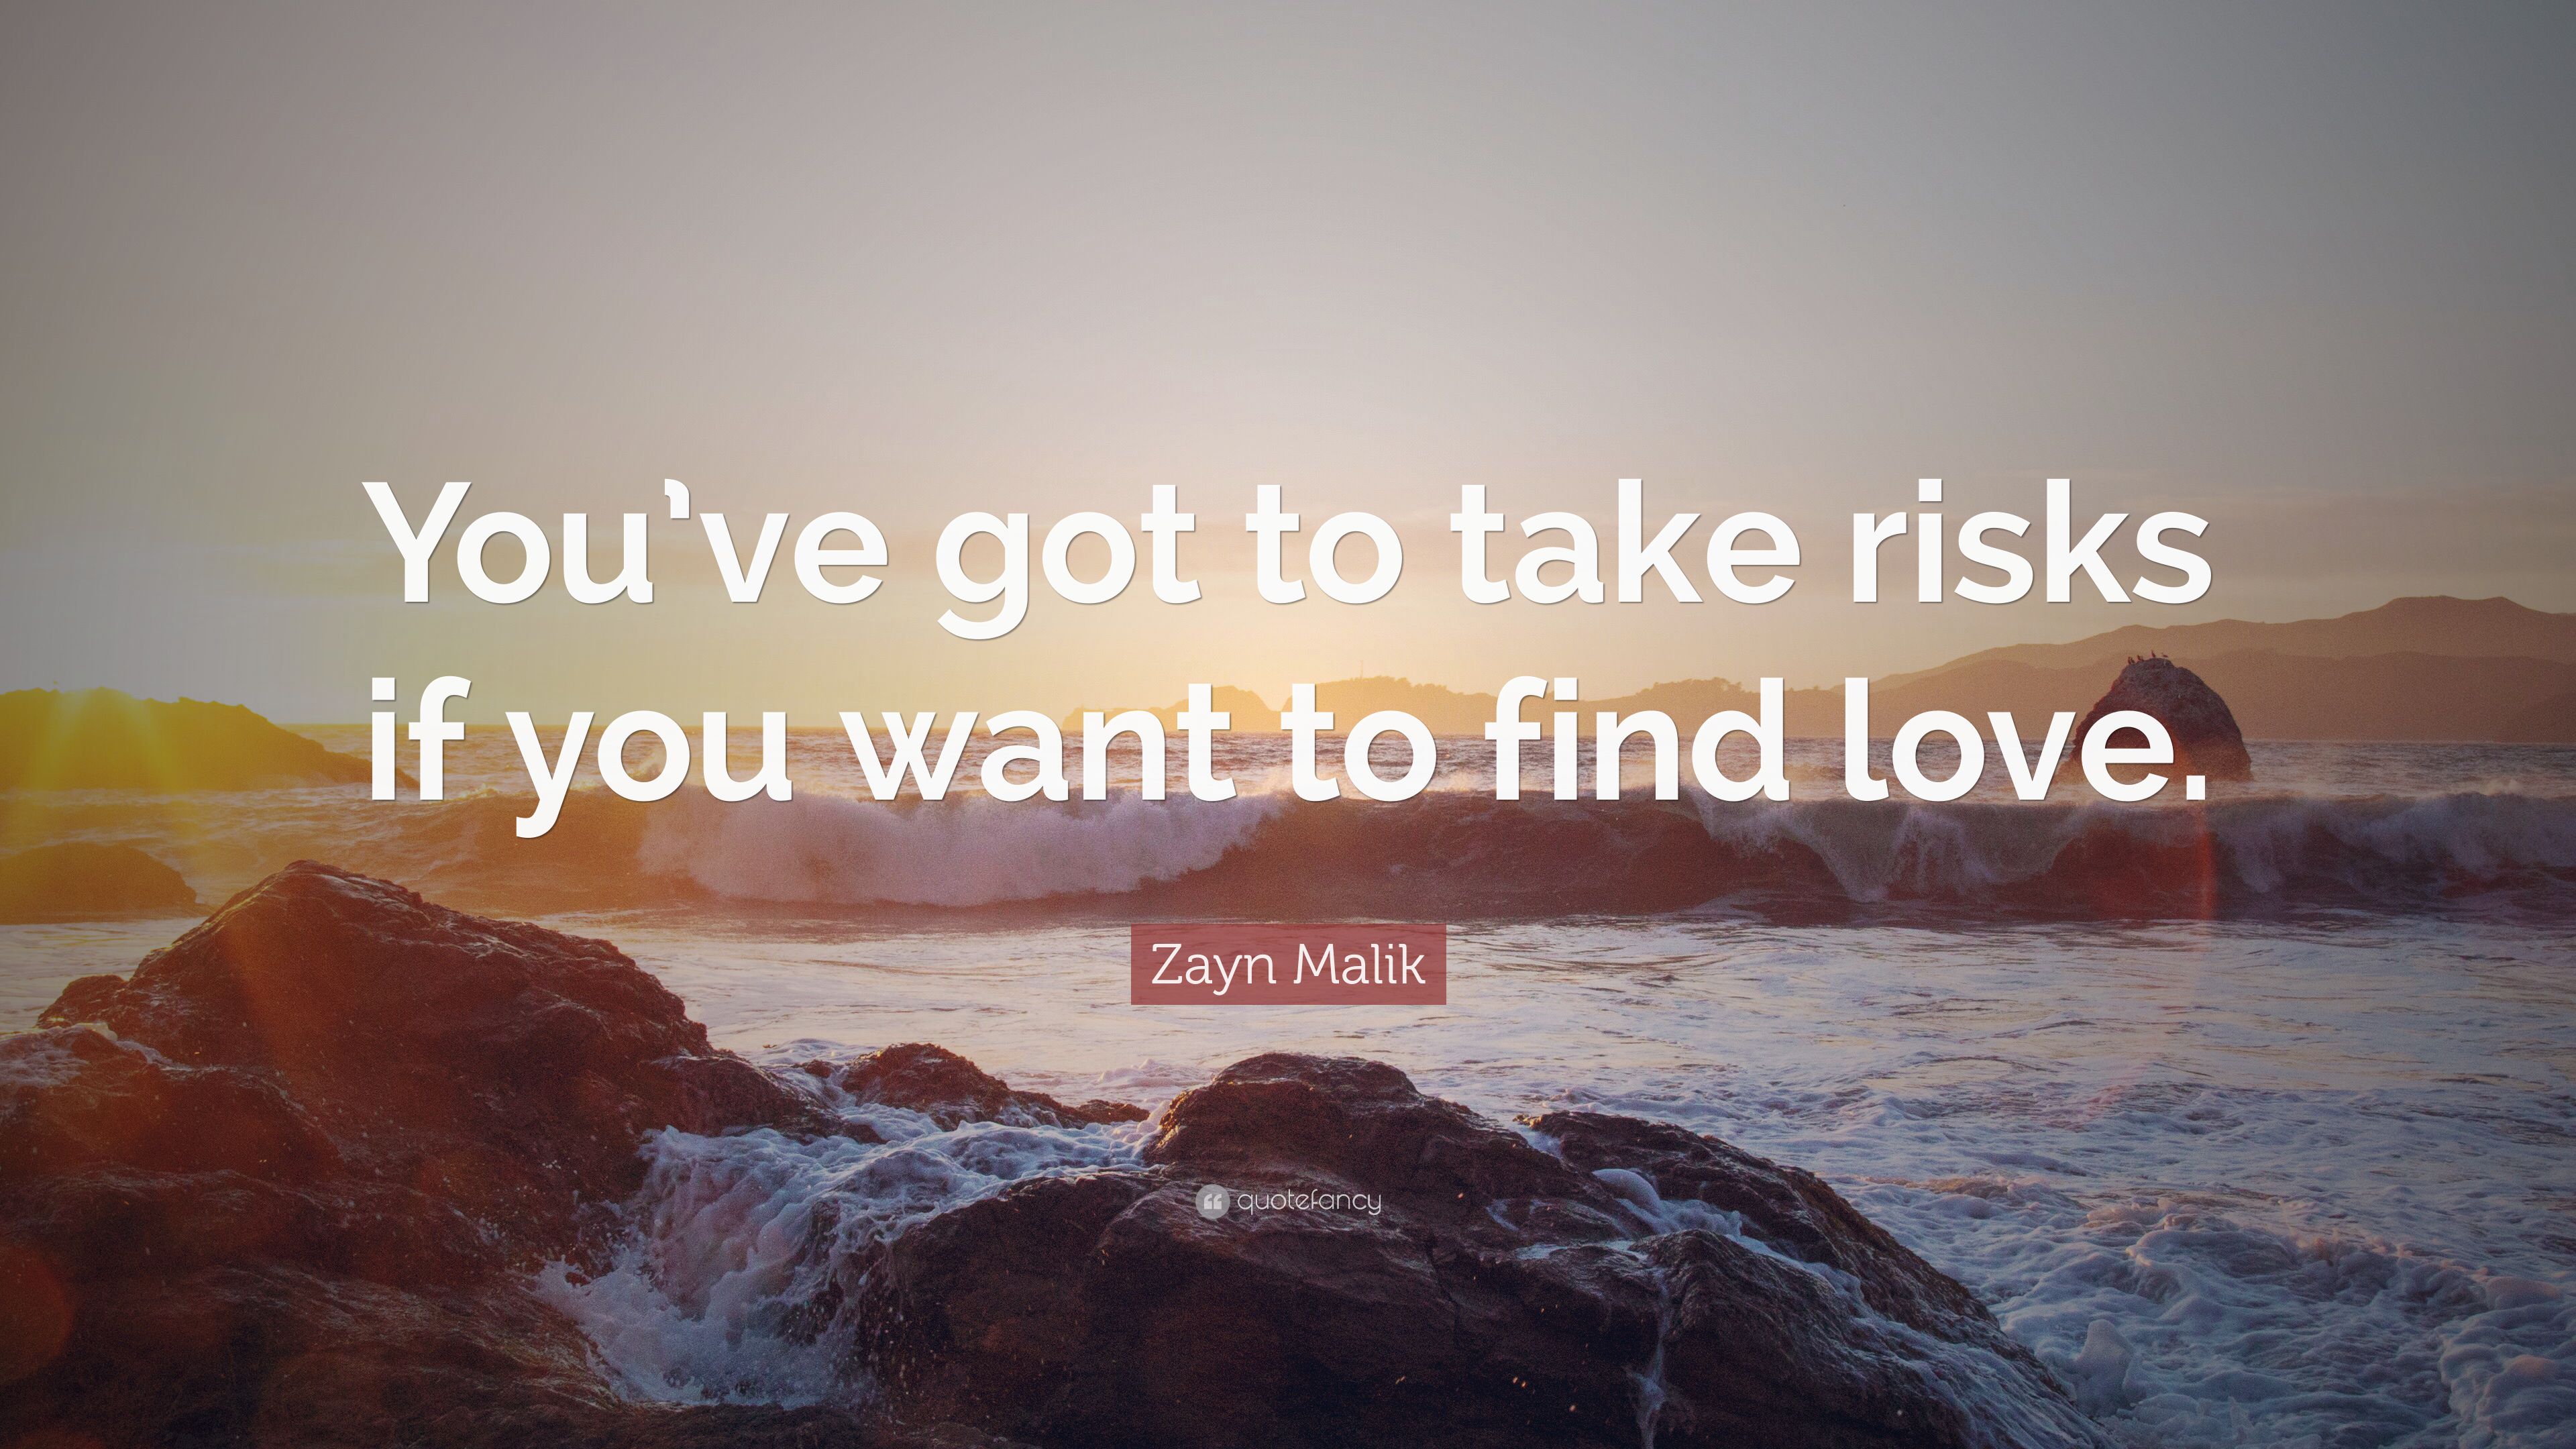 Zayn Malik Quote: “You've got to take risks if you want to find love.” (12 wallpaper)